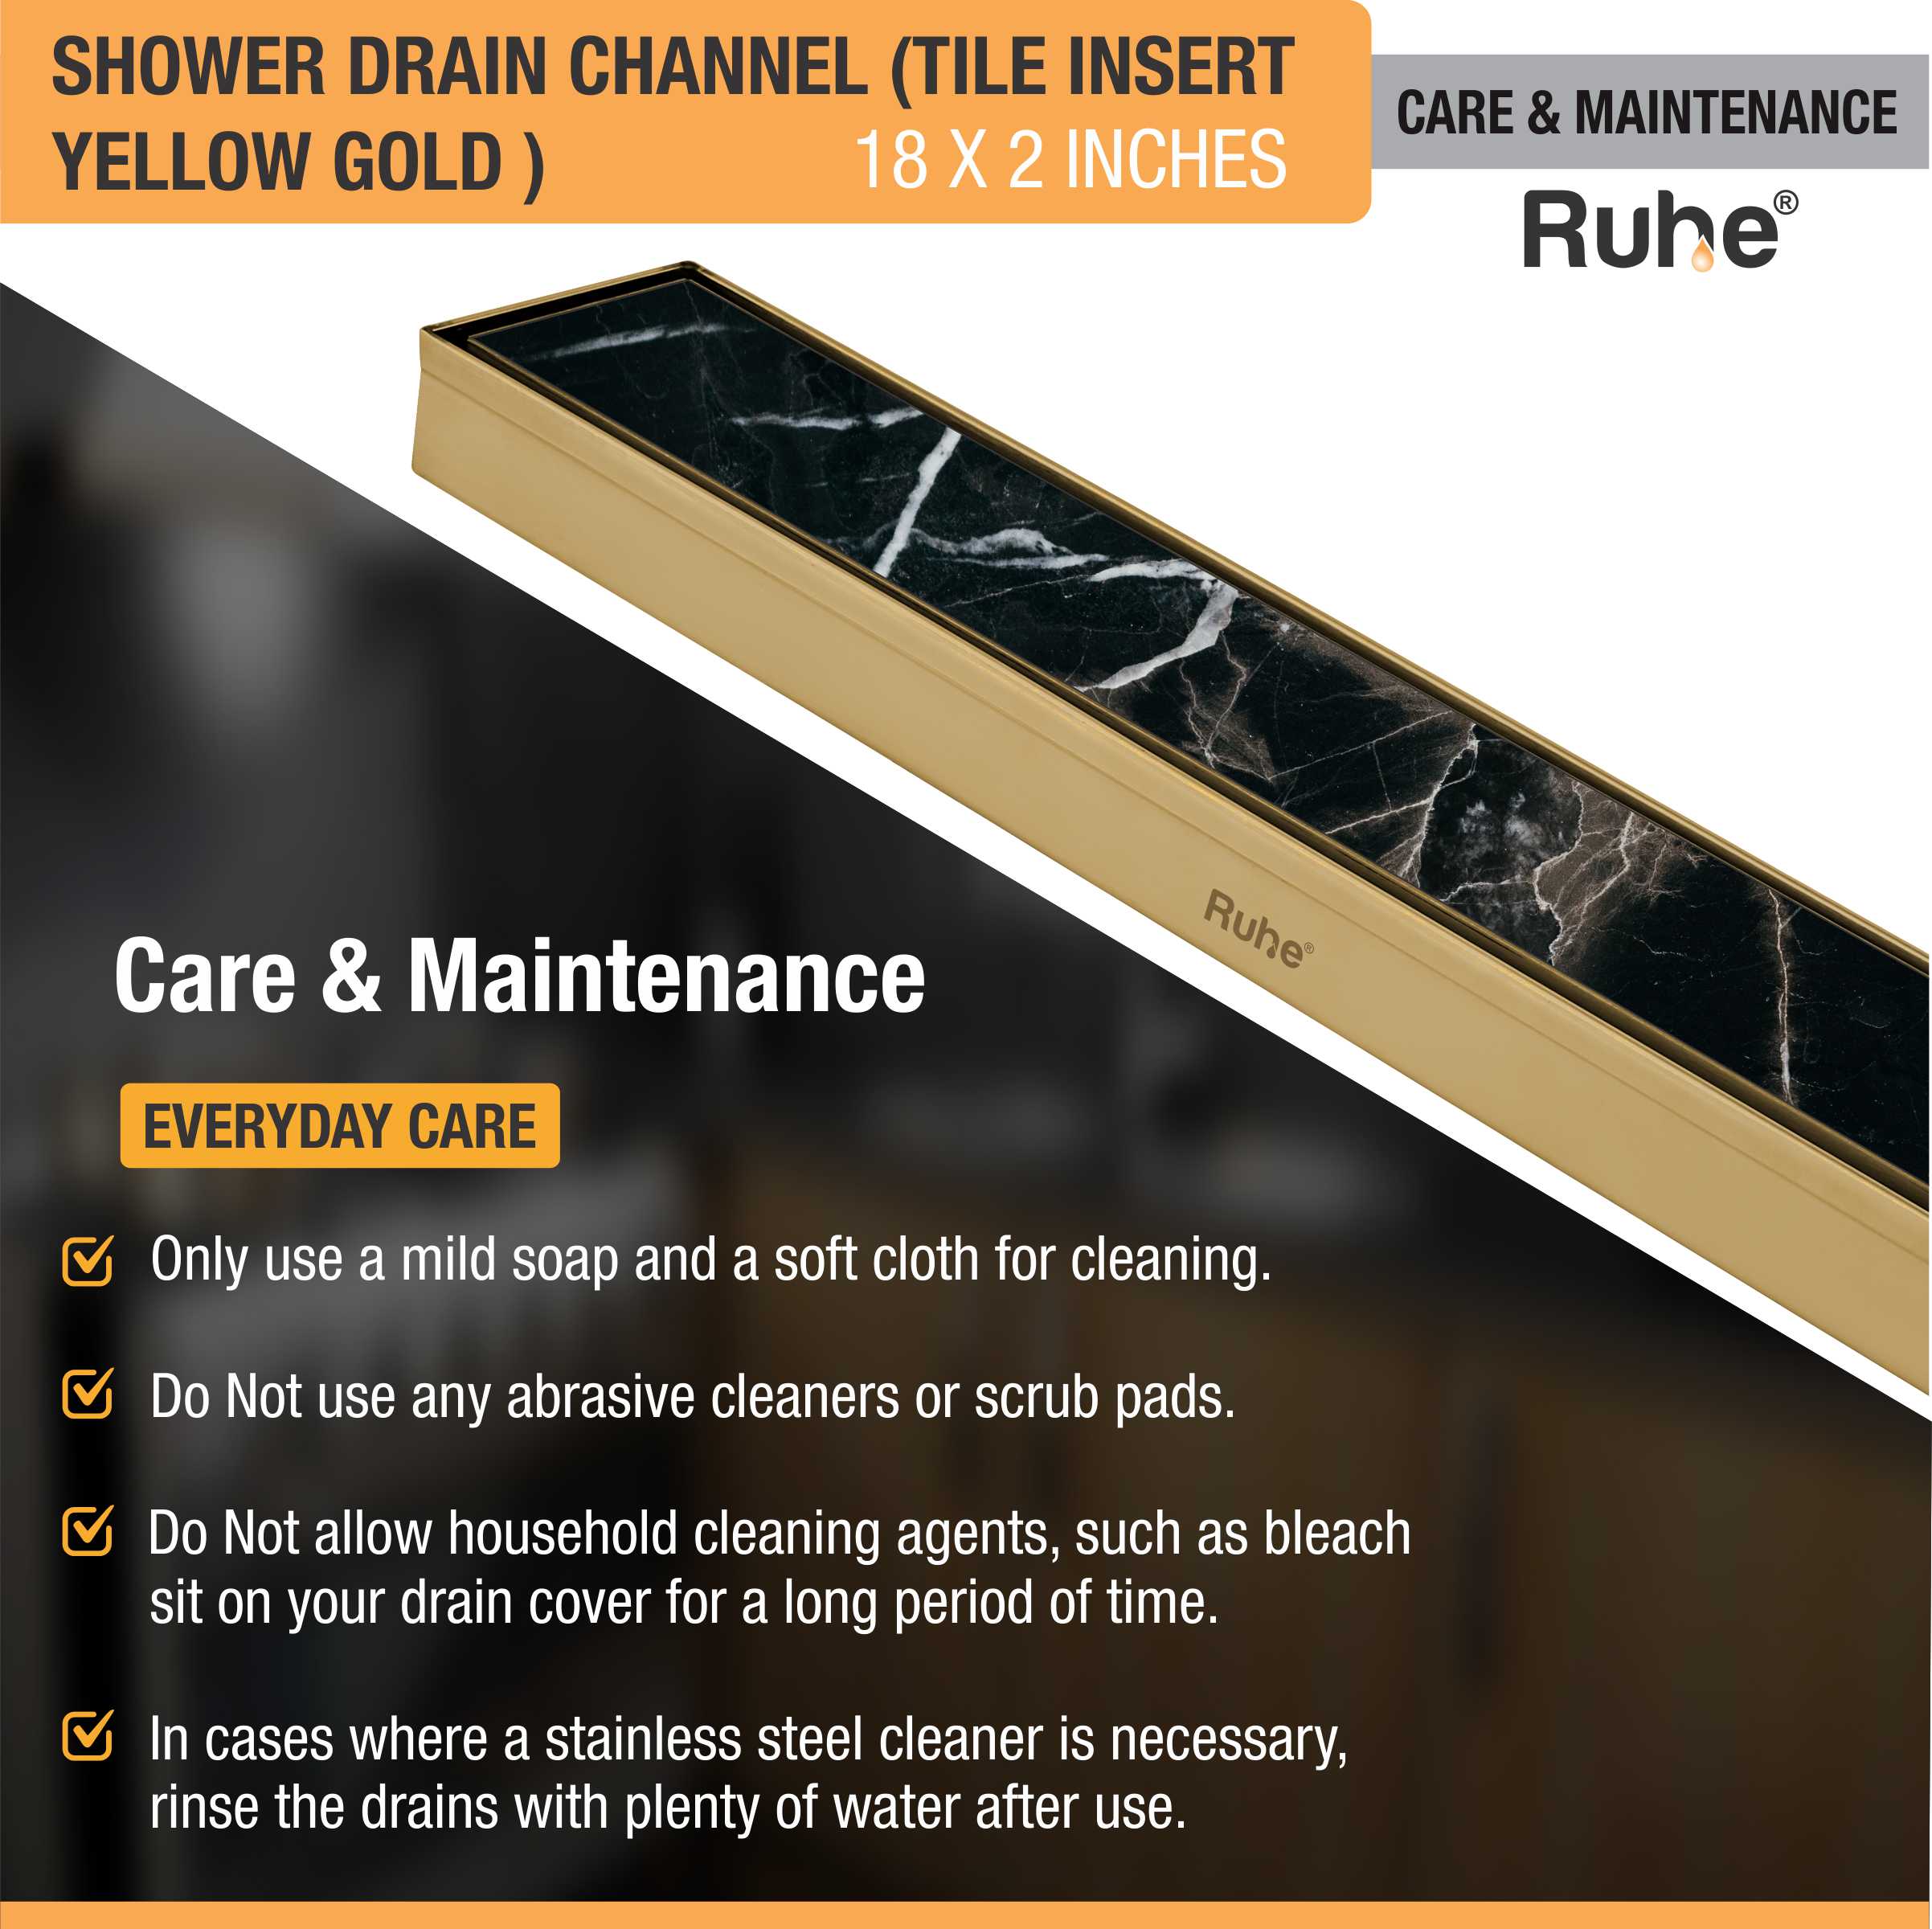 Tile Insert Shower Drain Channel (18 x 2 Inches) YELLOW GOLD care and maintenance